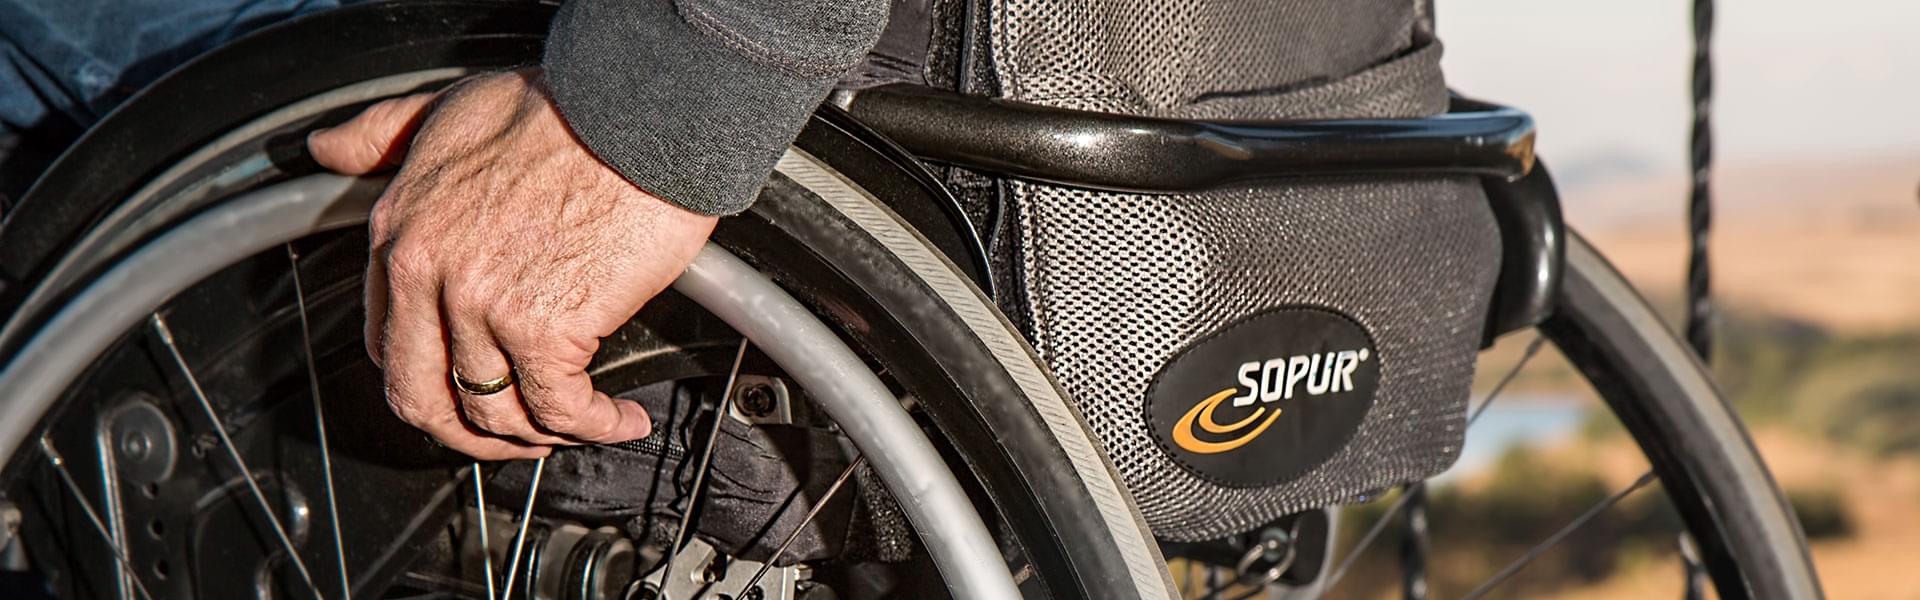 As A Disabled Person, How Can I Achieve a Comfortable and Independent Lifestyle?